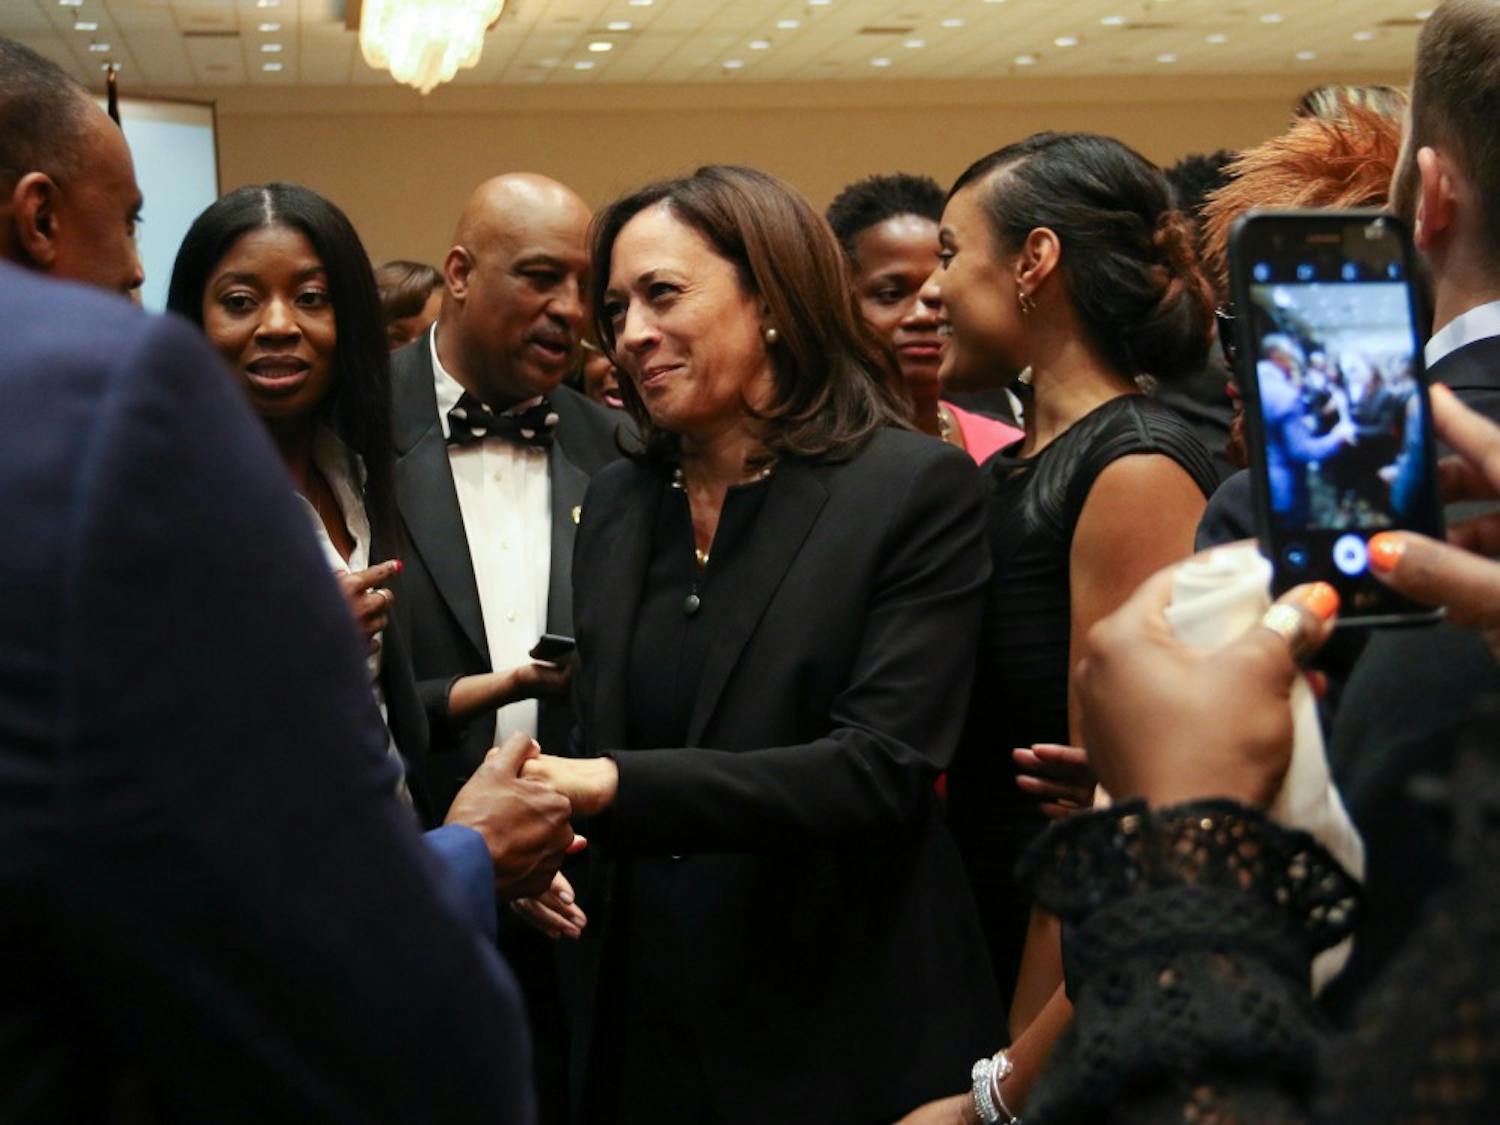 Democratic presidential Candidate Kamala Harris was in Durham last Saturday as the keynote speaker for the Durham Committee on the Affairs of Black People's Founders' Day Banquet. Senator Harris (D-CA) was introduced by Representative G.K. Butterfield (D-NC). NC Governor Roy Cooper and Chief Justice Cheri Beasley of the NC Supreme Court were also in attendance at an event that honors community members and awards scholarships to students from Durham.

Photos by Photo Editor Mary Helen Wood

&nbsp;See Stefanie Pousoulides's article here.